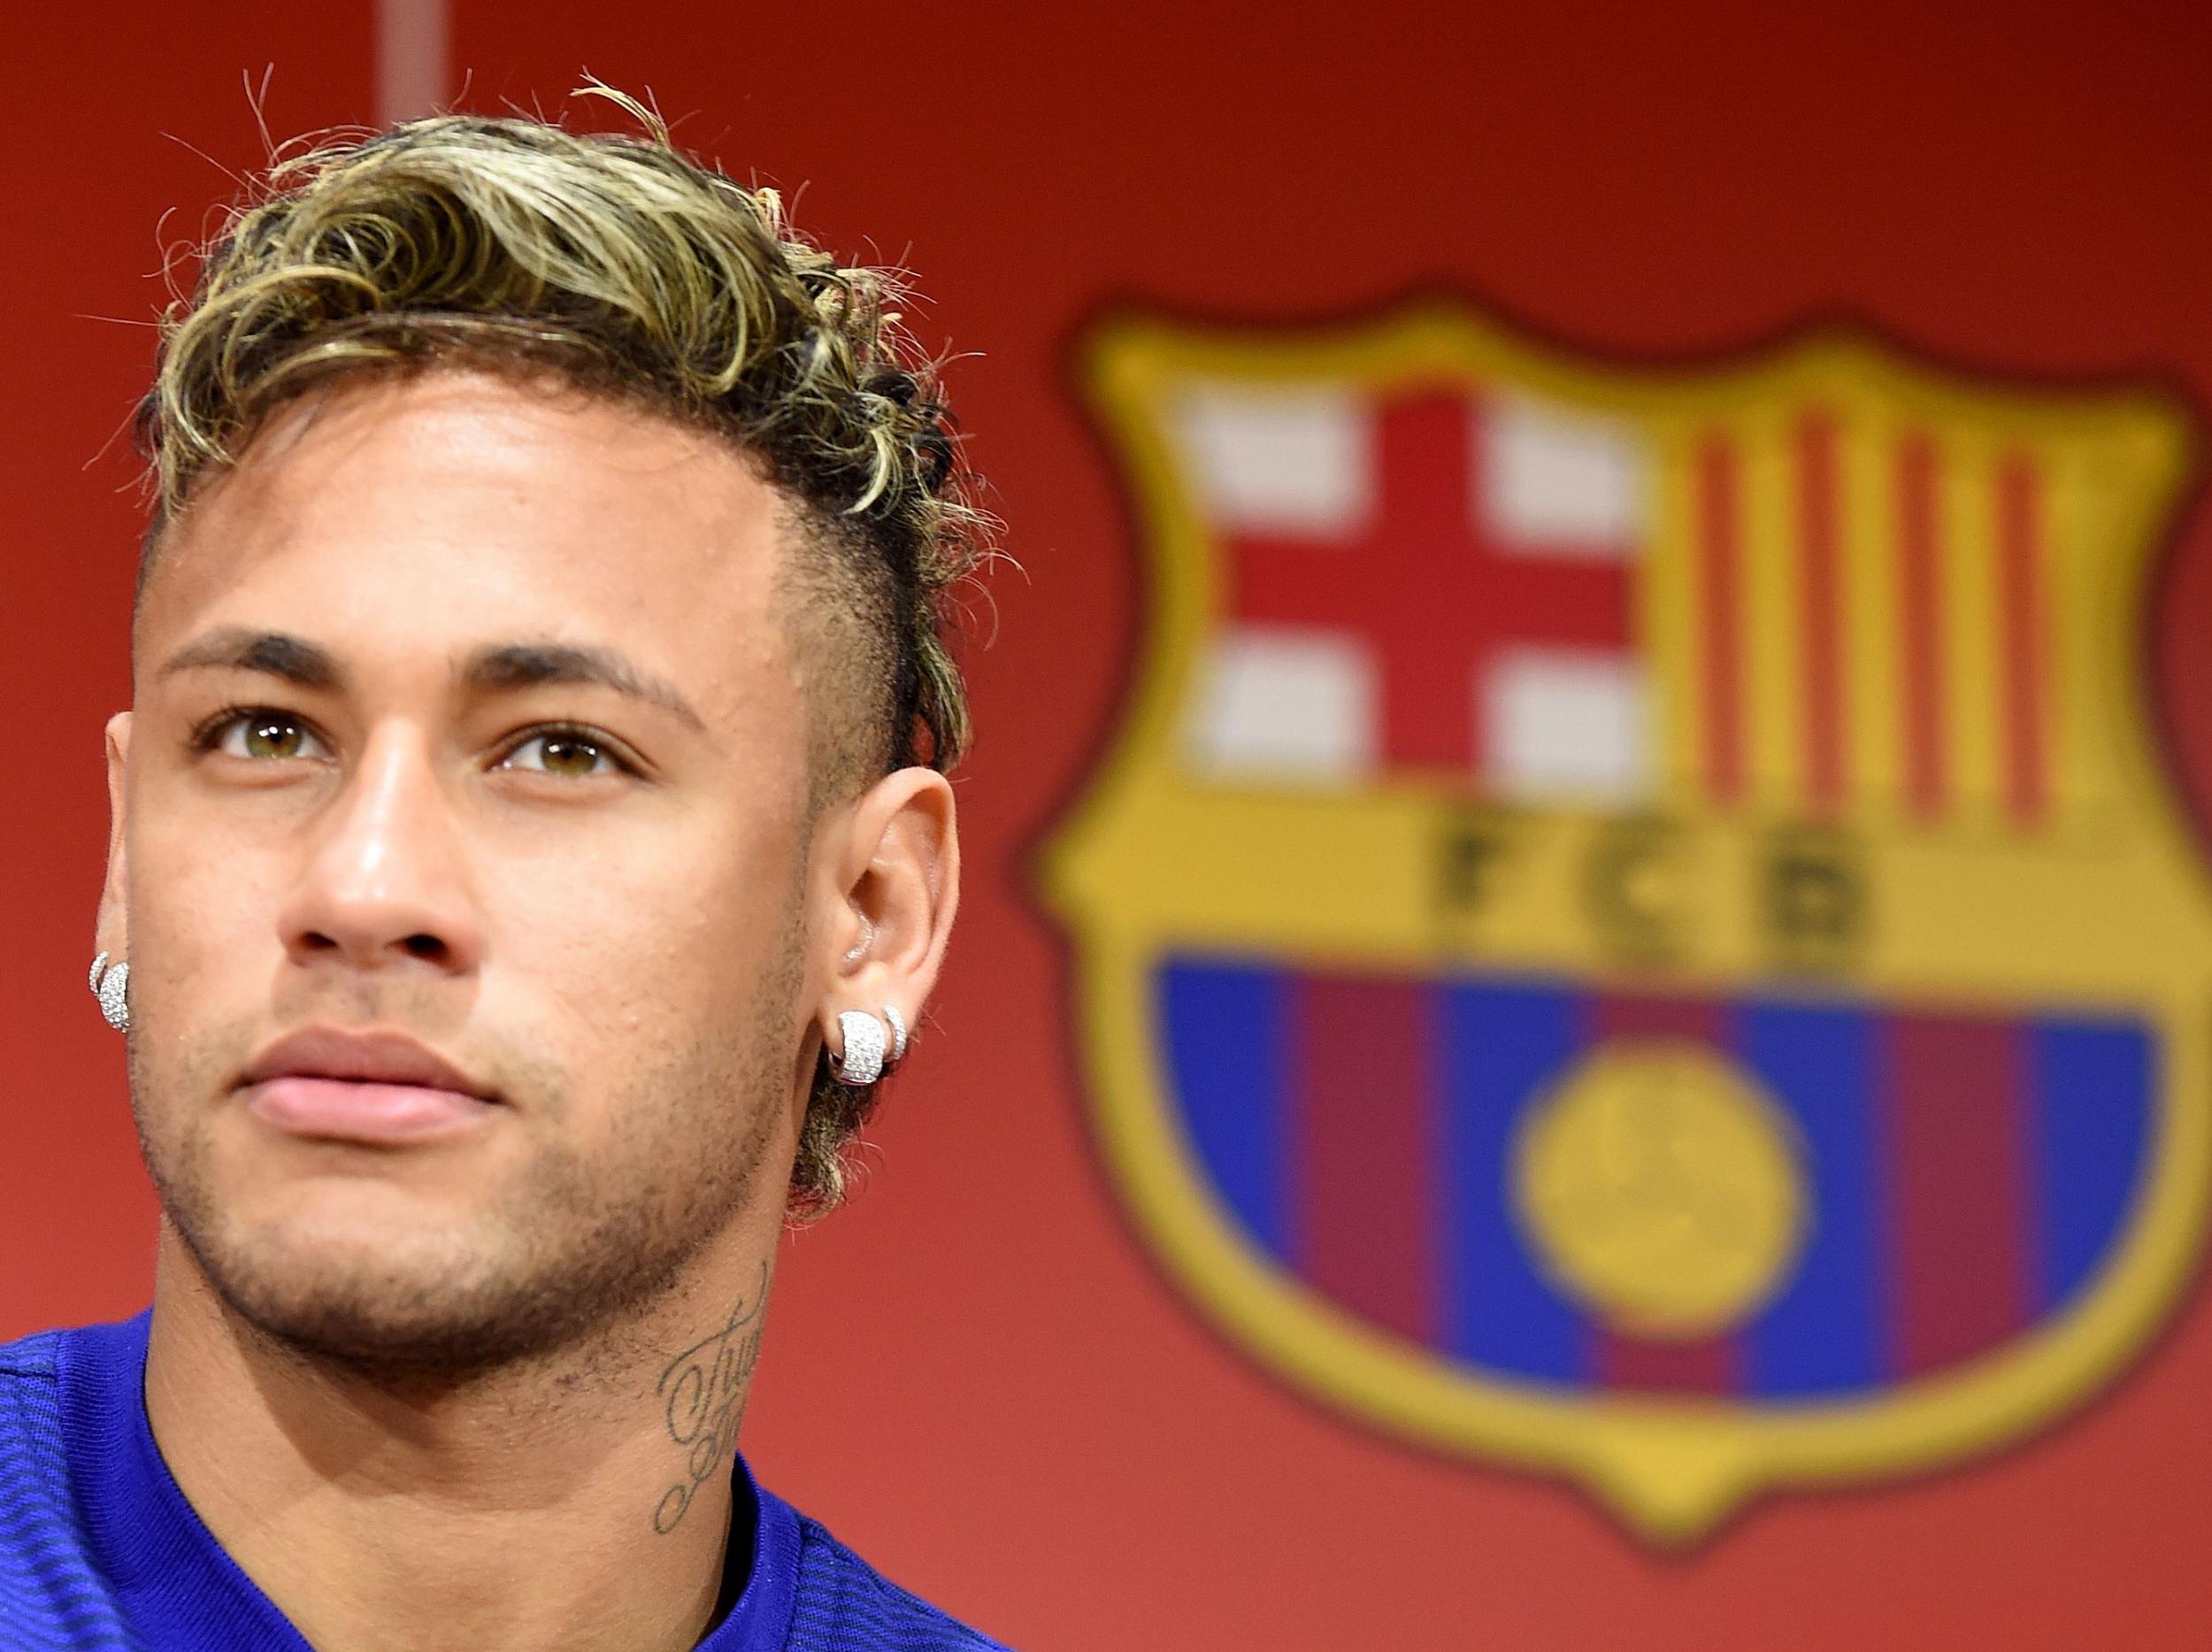 Neymar is rumoured to be interested in a move to PSG